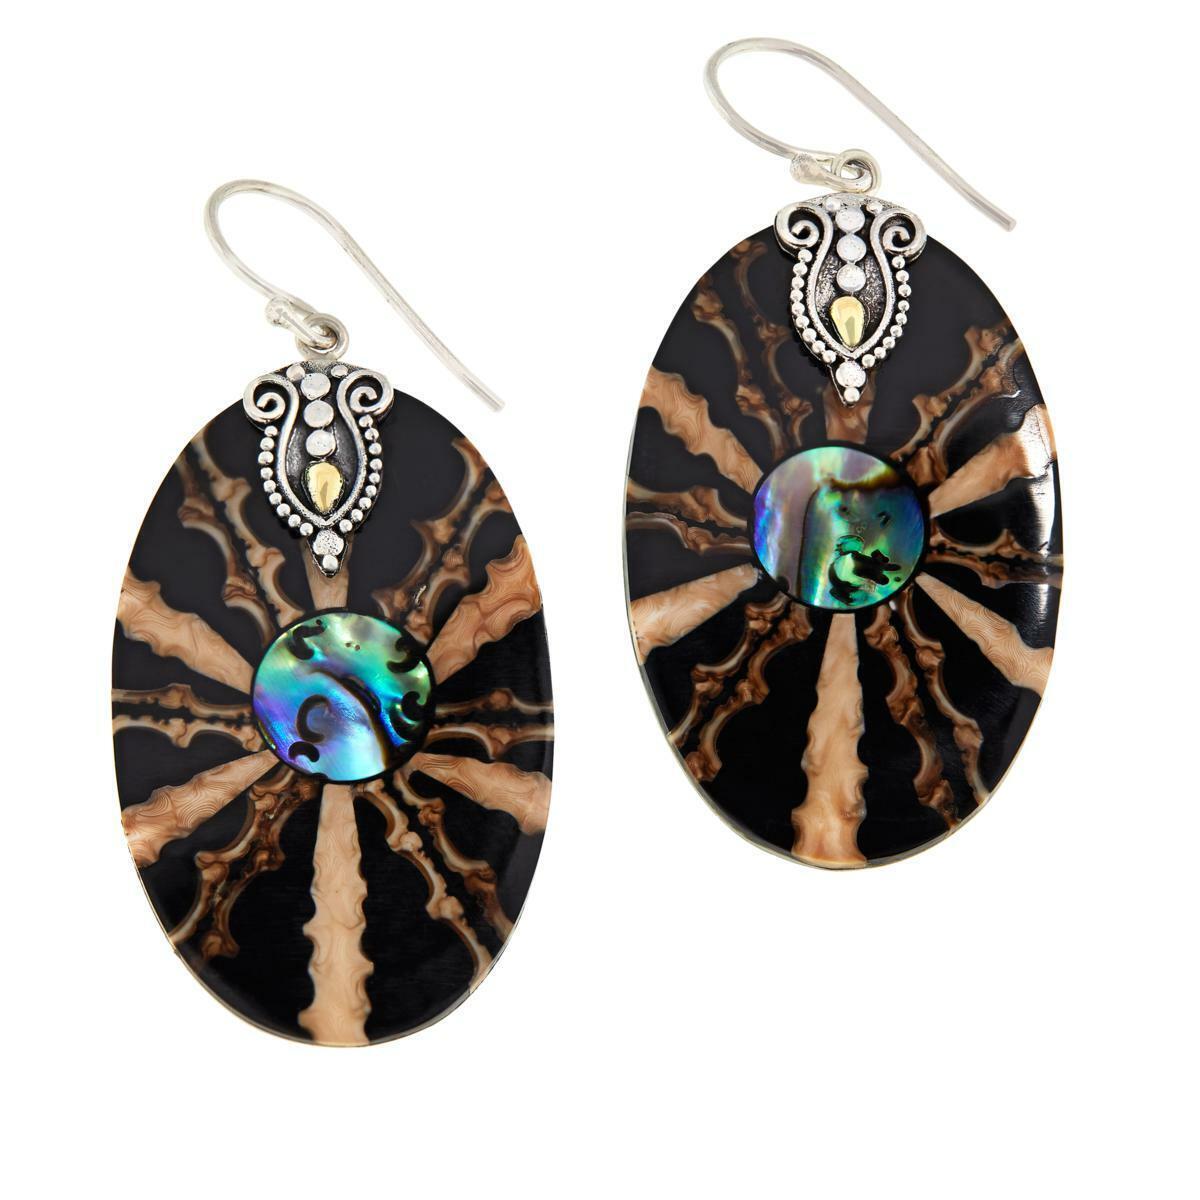 Bali RoManse Sterling Silver & 18K Abalone Oval Shell and Resin Drop Earrings